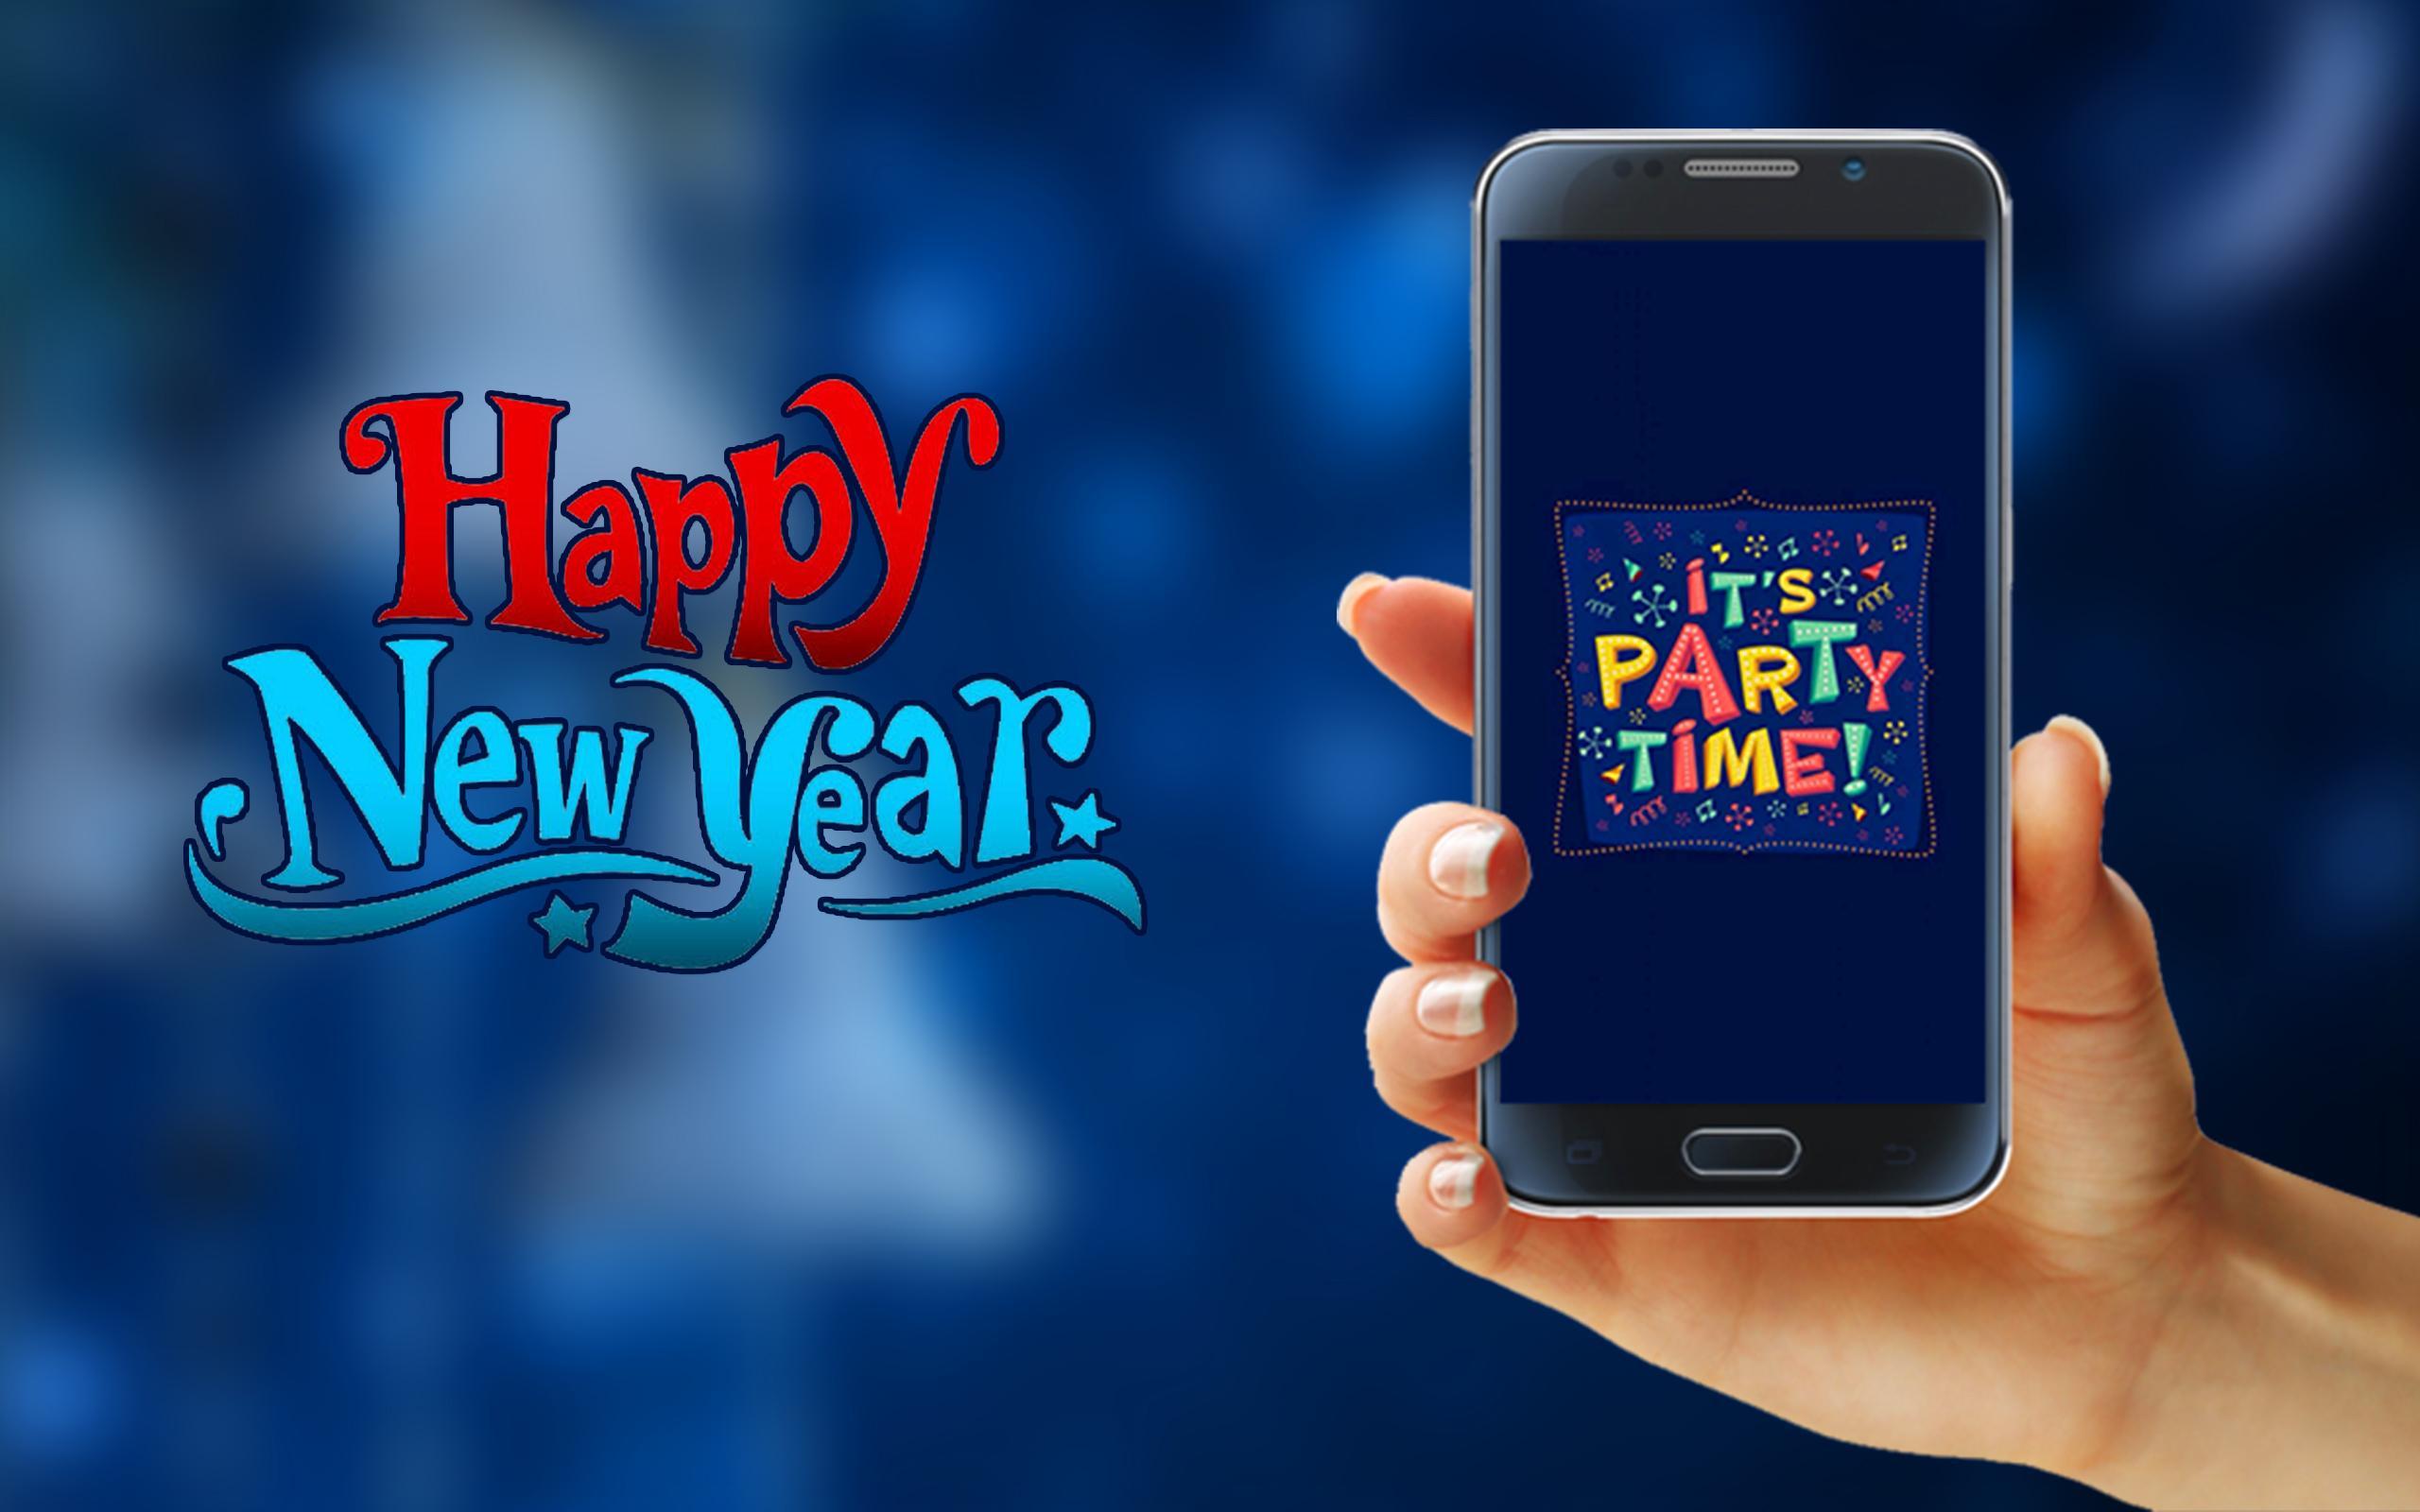 New Year Theme And Launcher For Android Apk Download